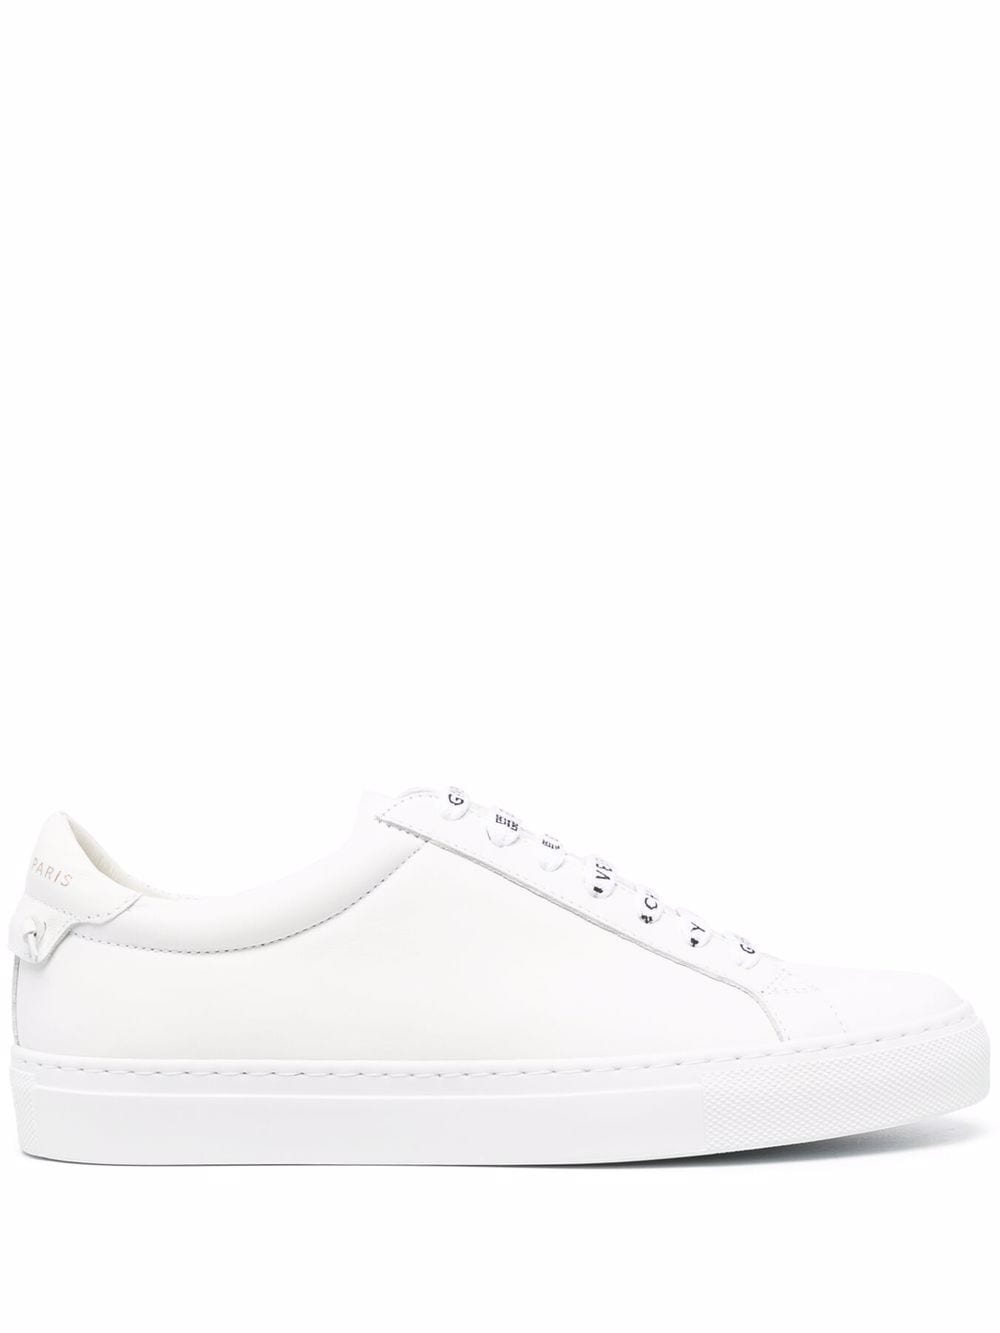 GIVENCHY URBAN STREET LOW-TOP LACE-UP SNEAKERS